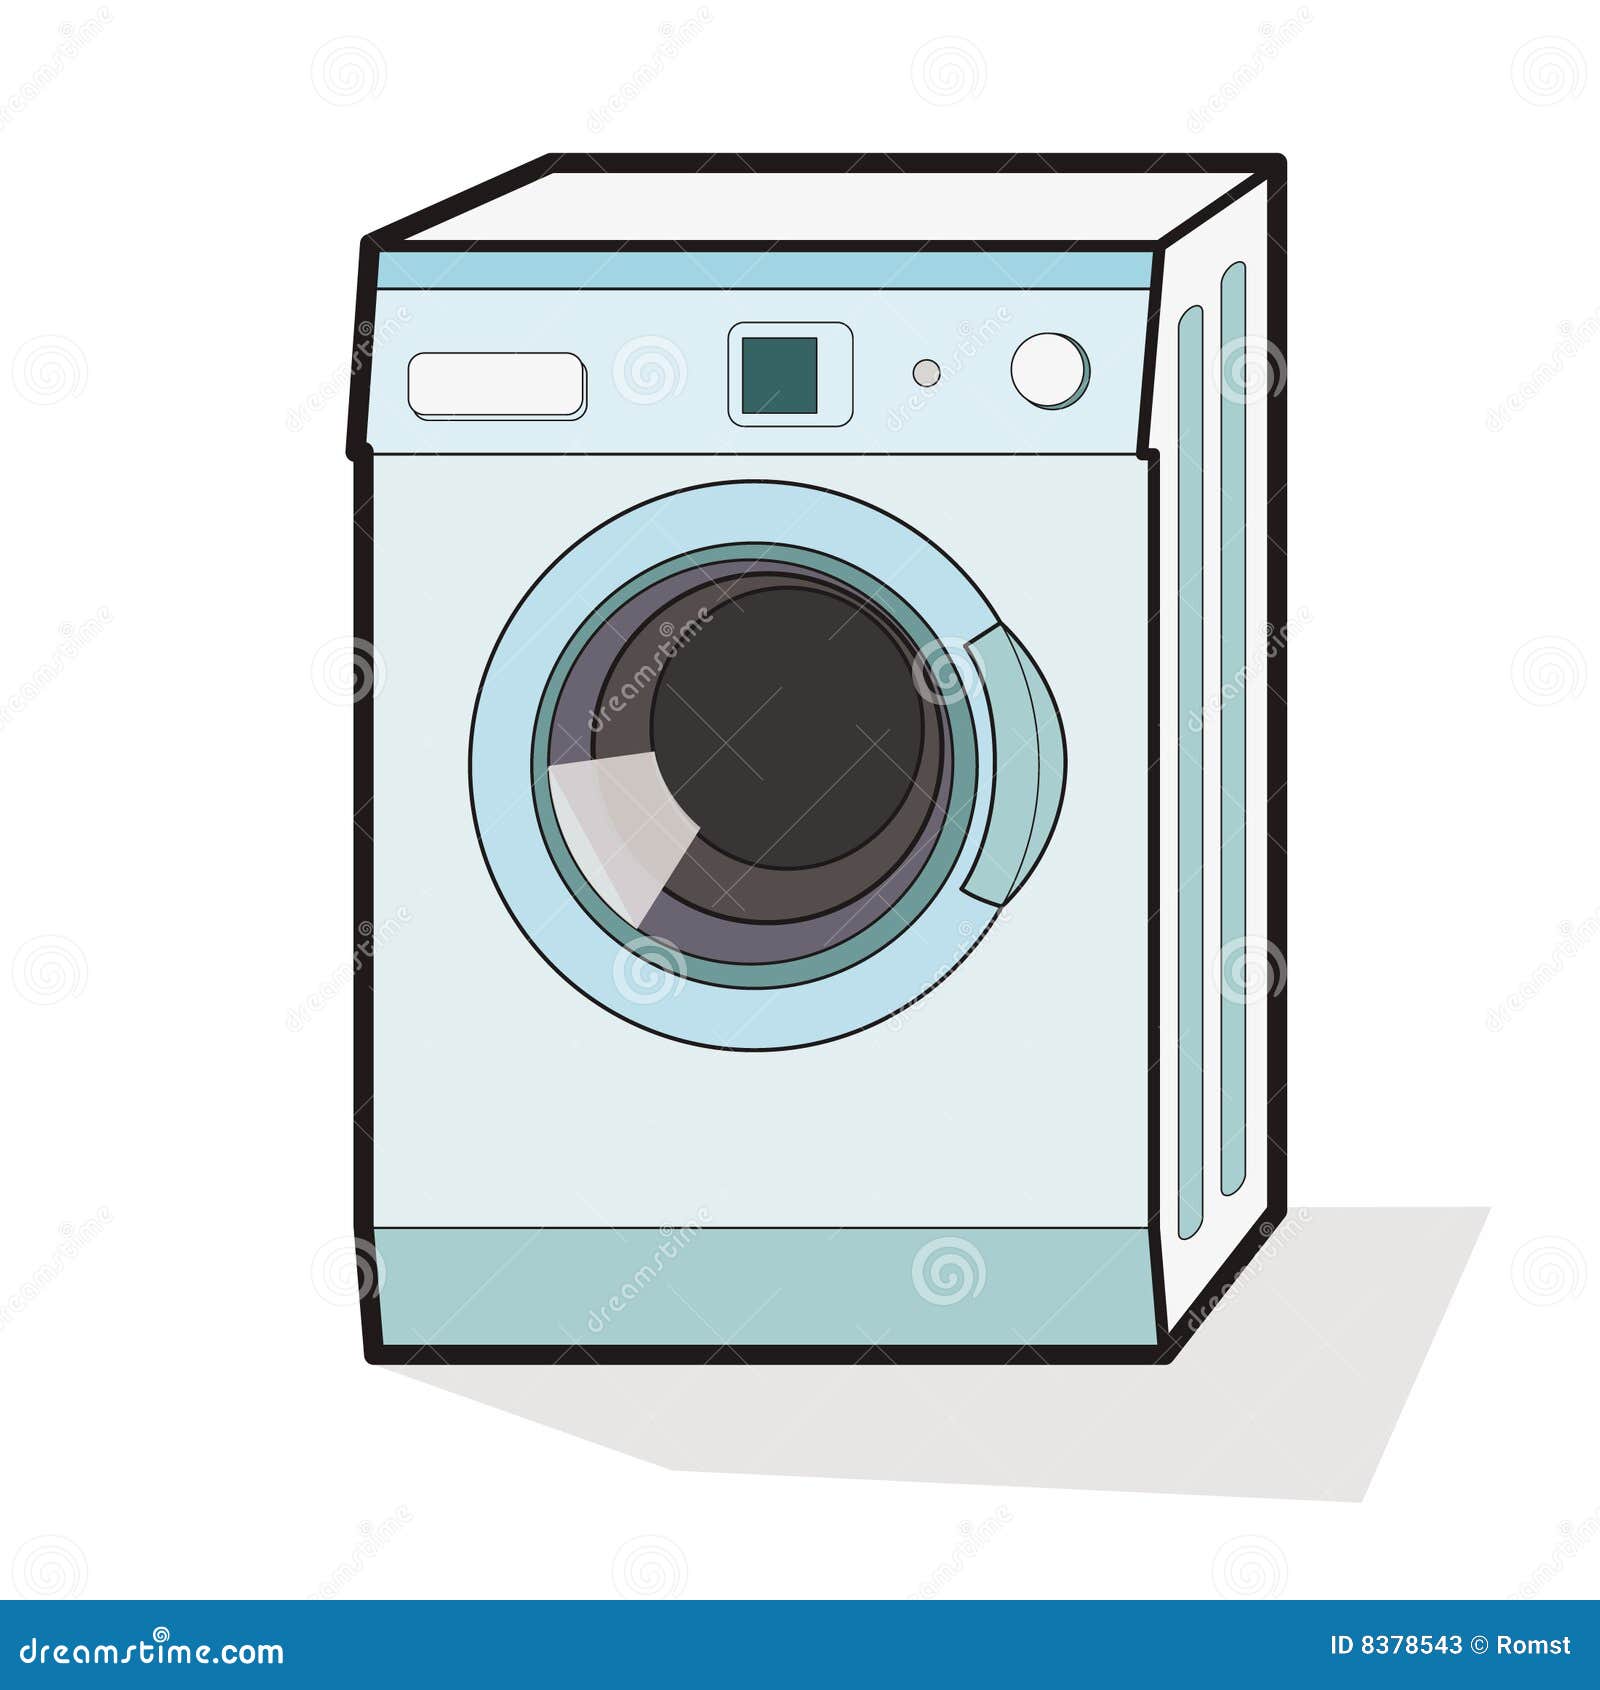 free clipart clothes dryer - photo #37